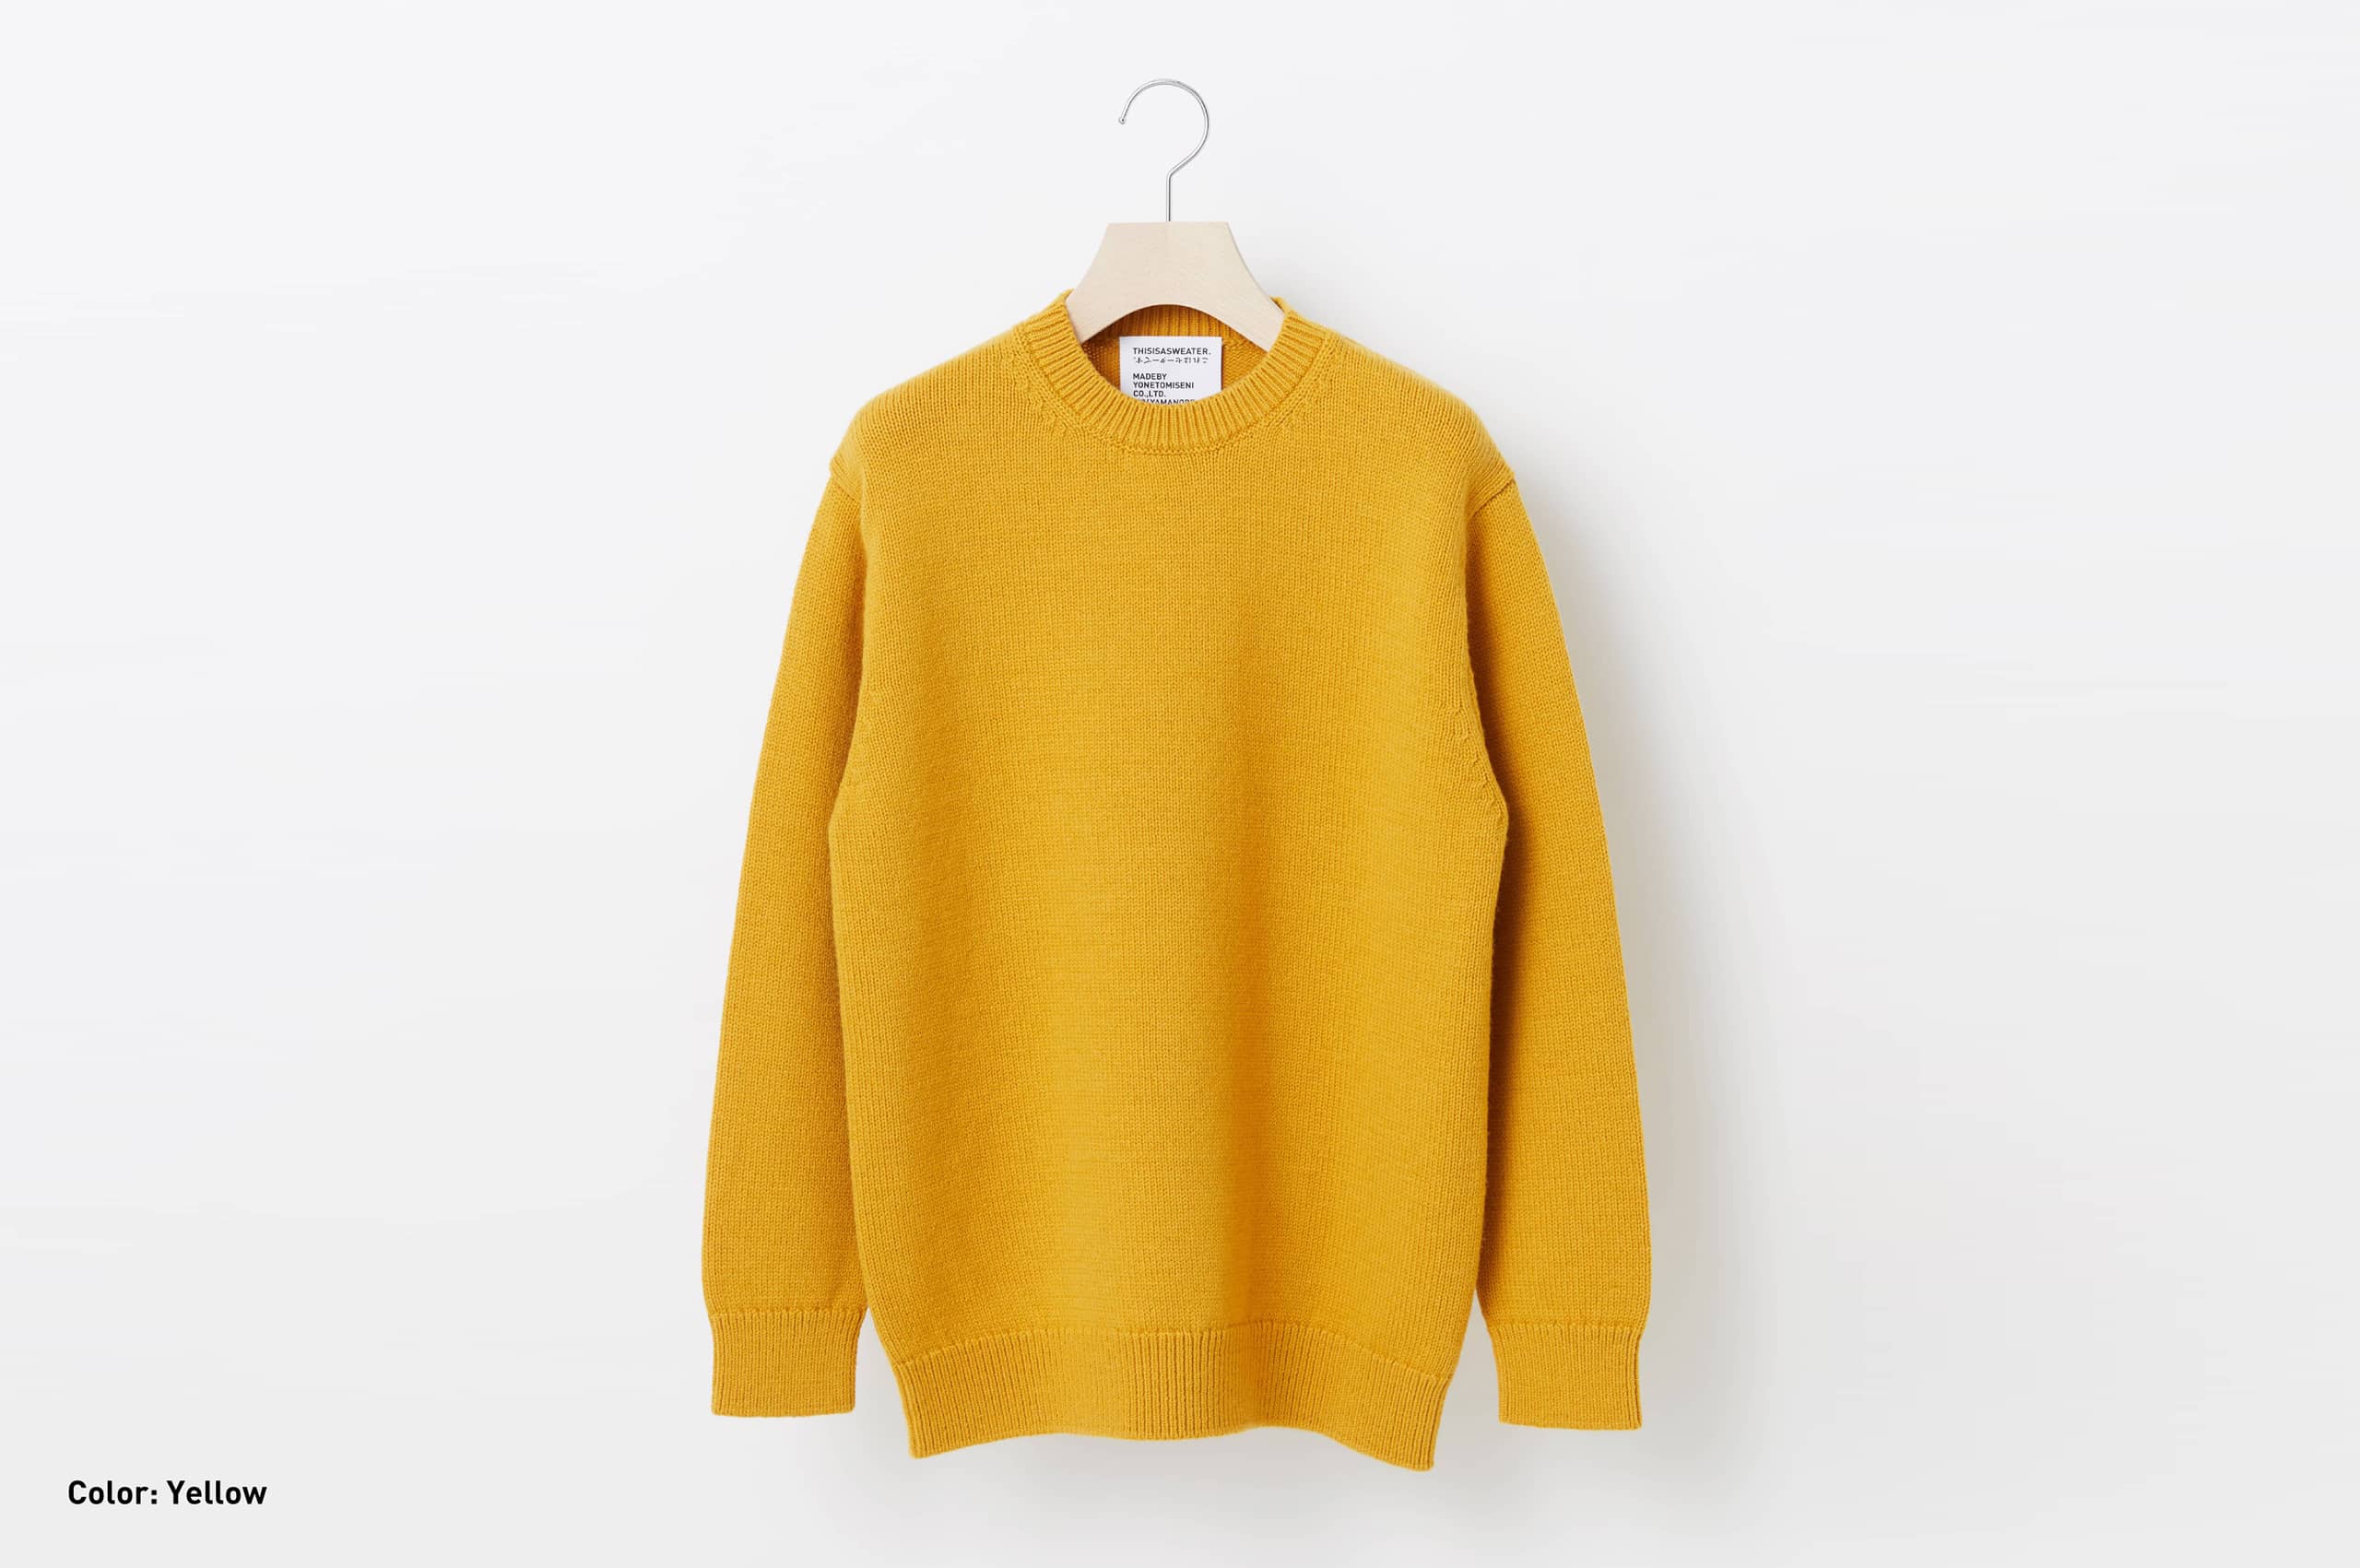 THIS IS A SWEATER.